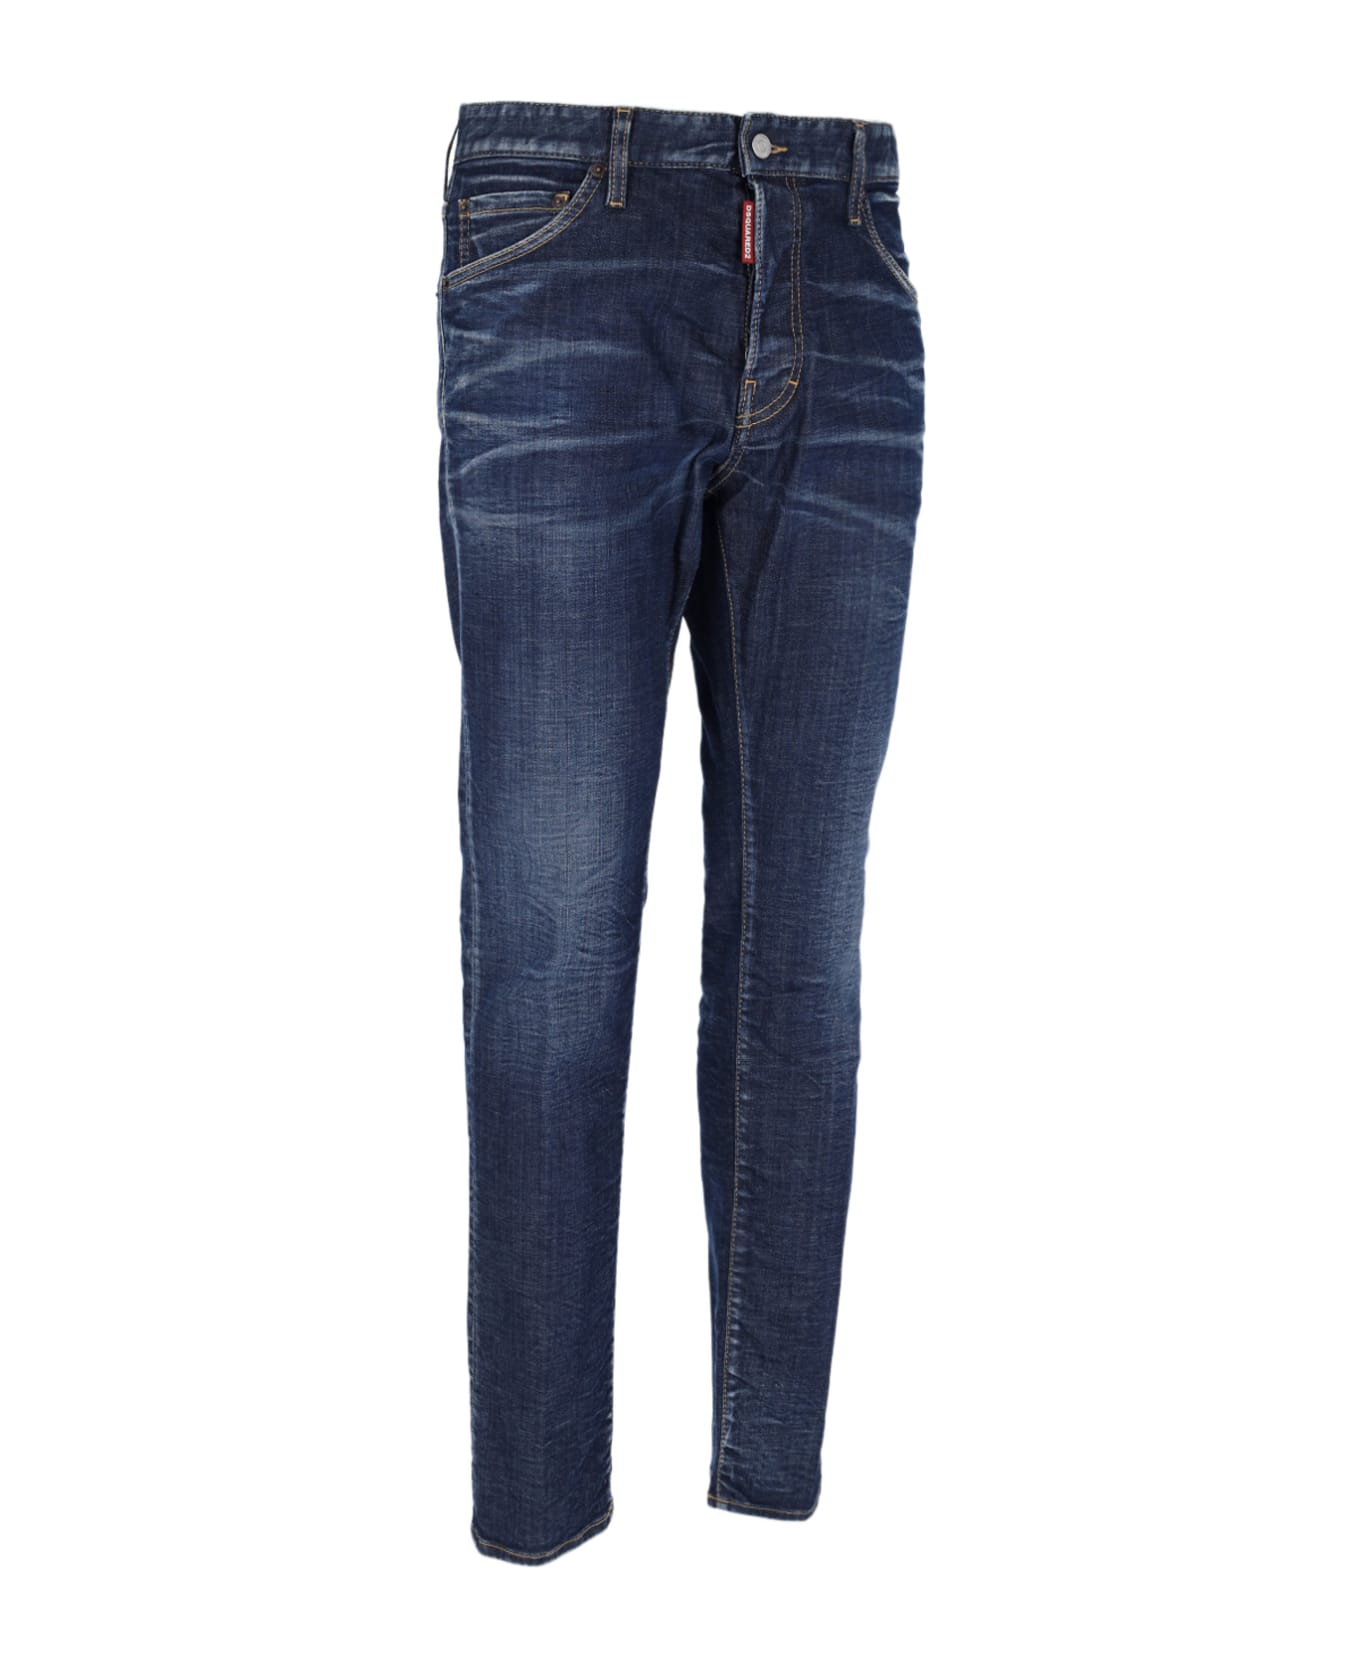 Dsquared2 'canadian Classic' Jeans - Blue